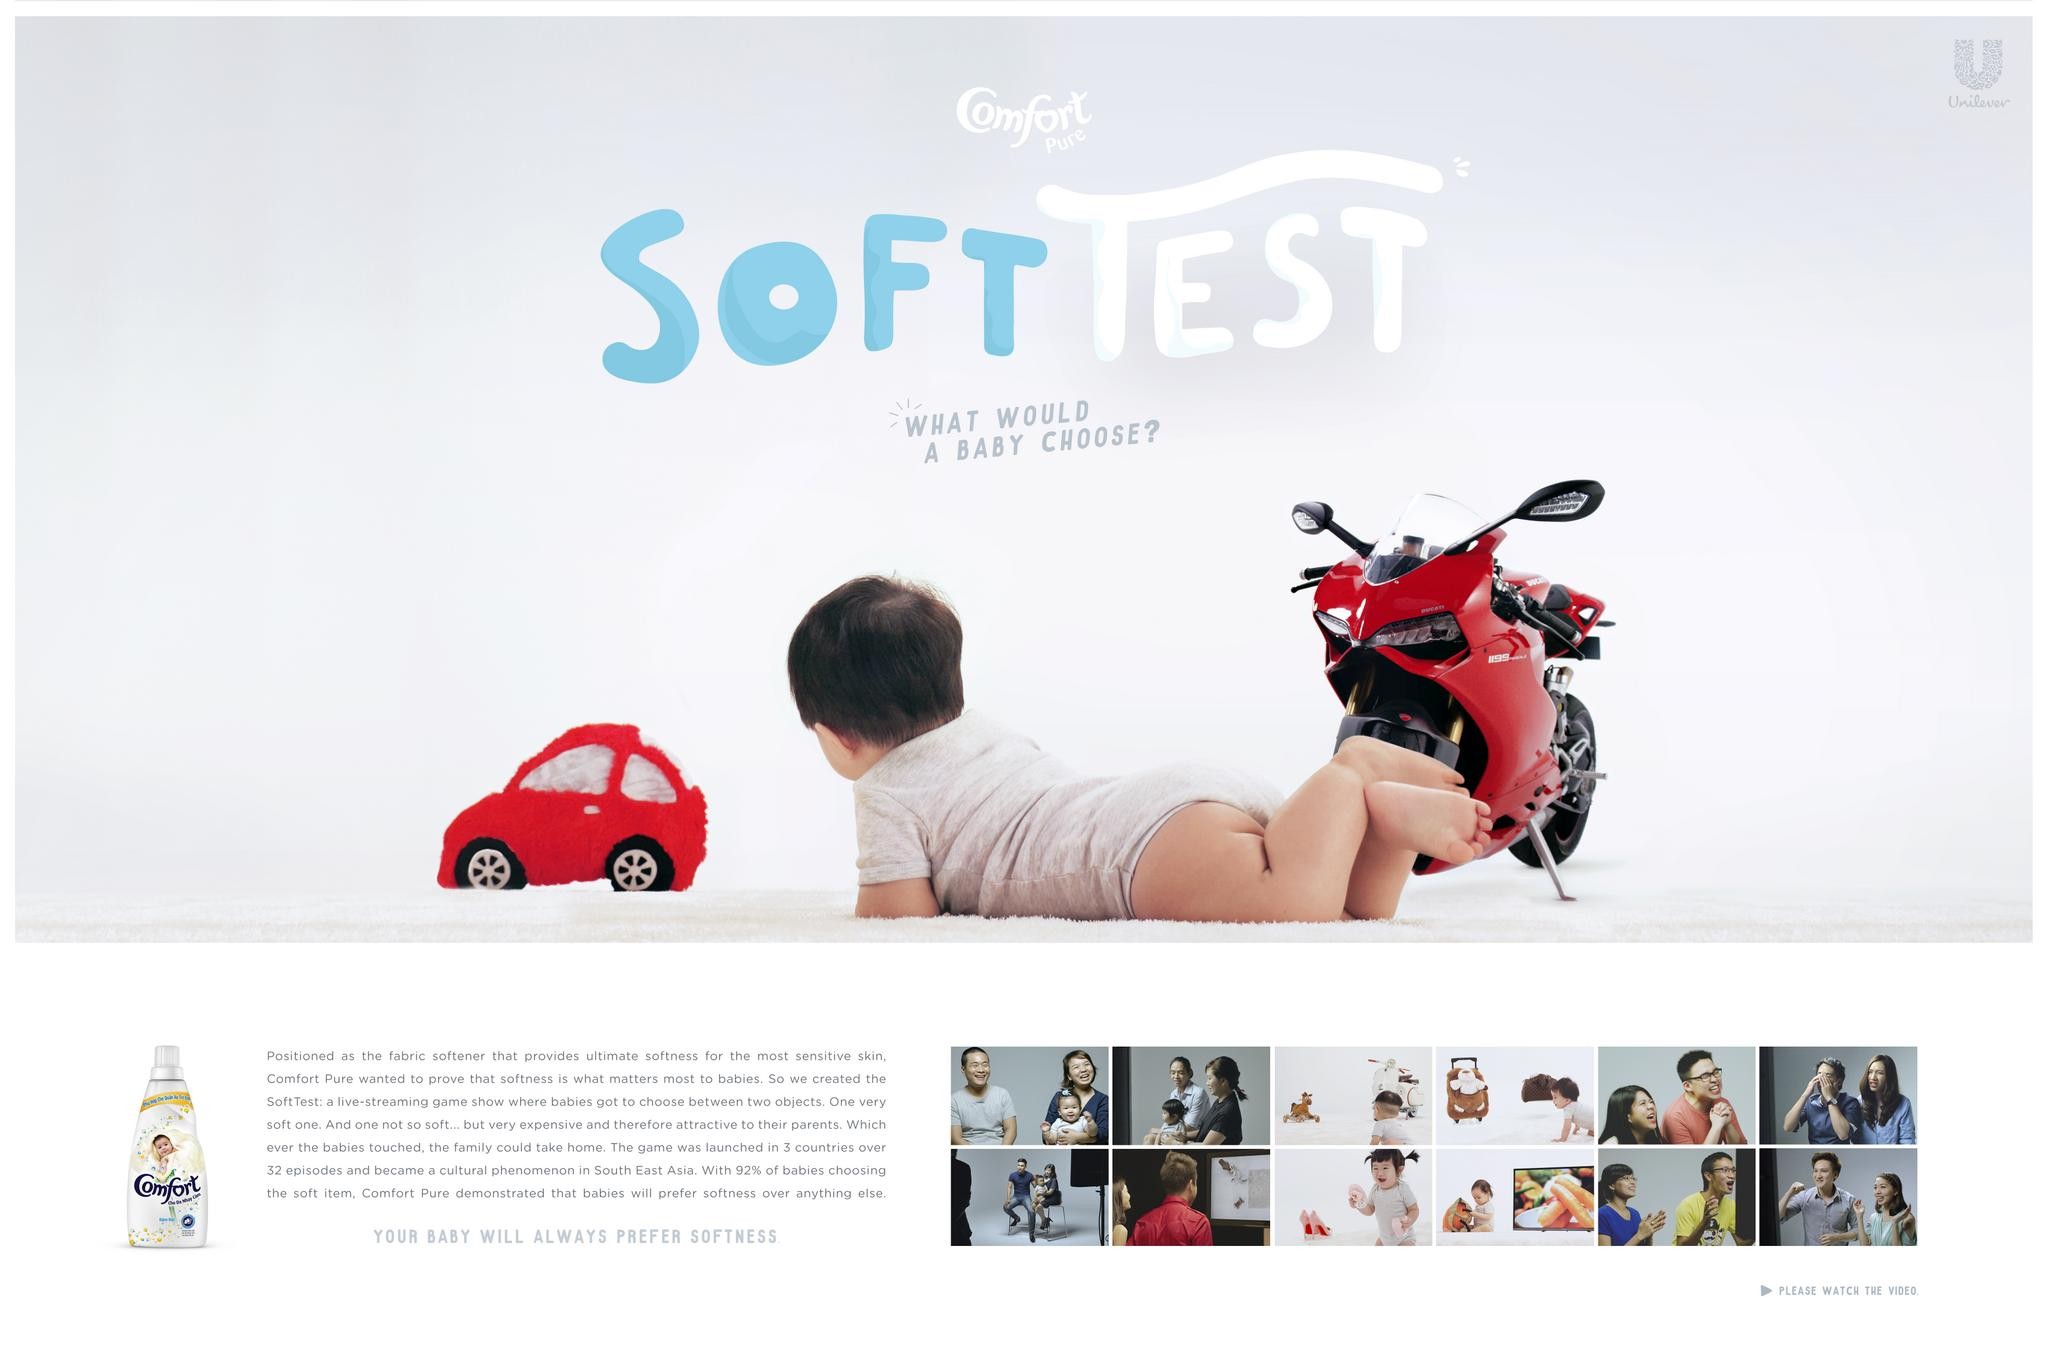 THE SOFTTEST